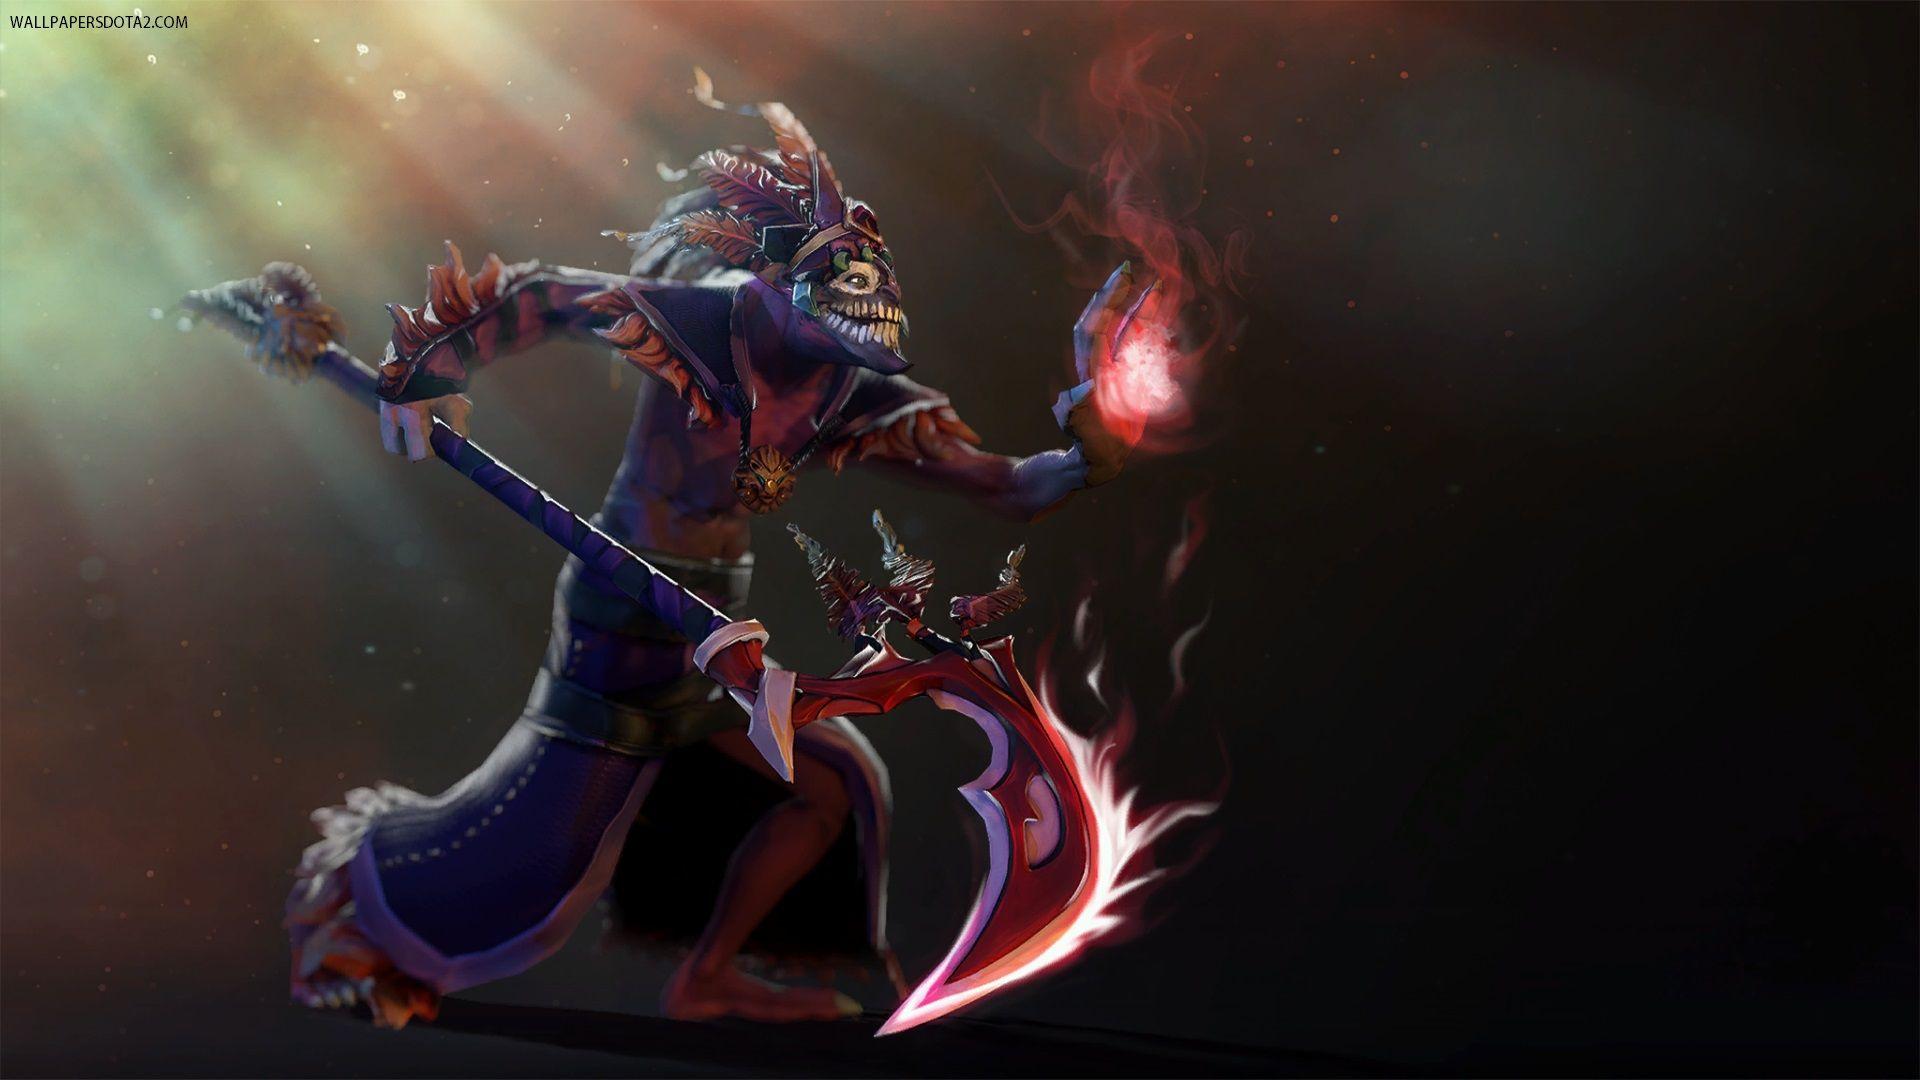 Dazzle Shadow Flame background for laptops Dota 2. Wallpaper